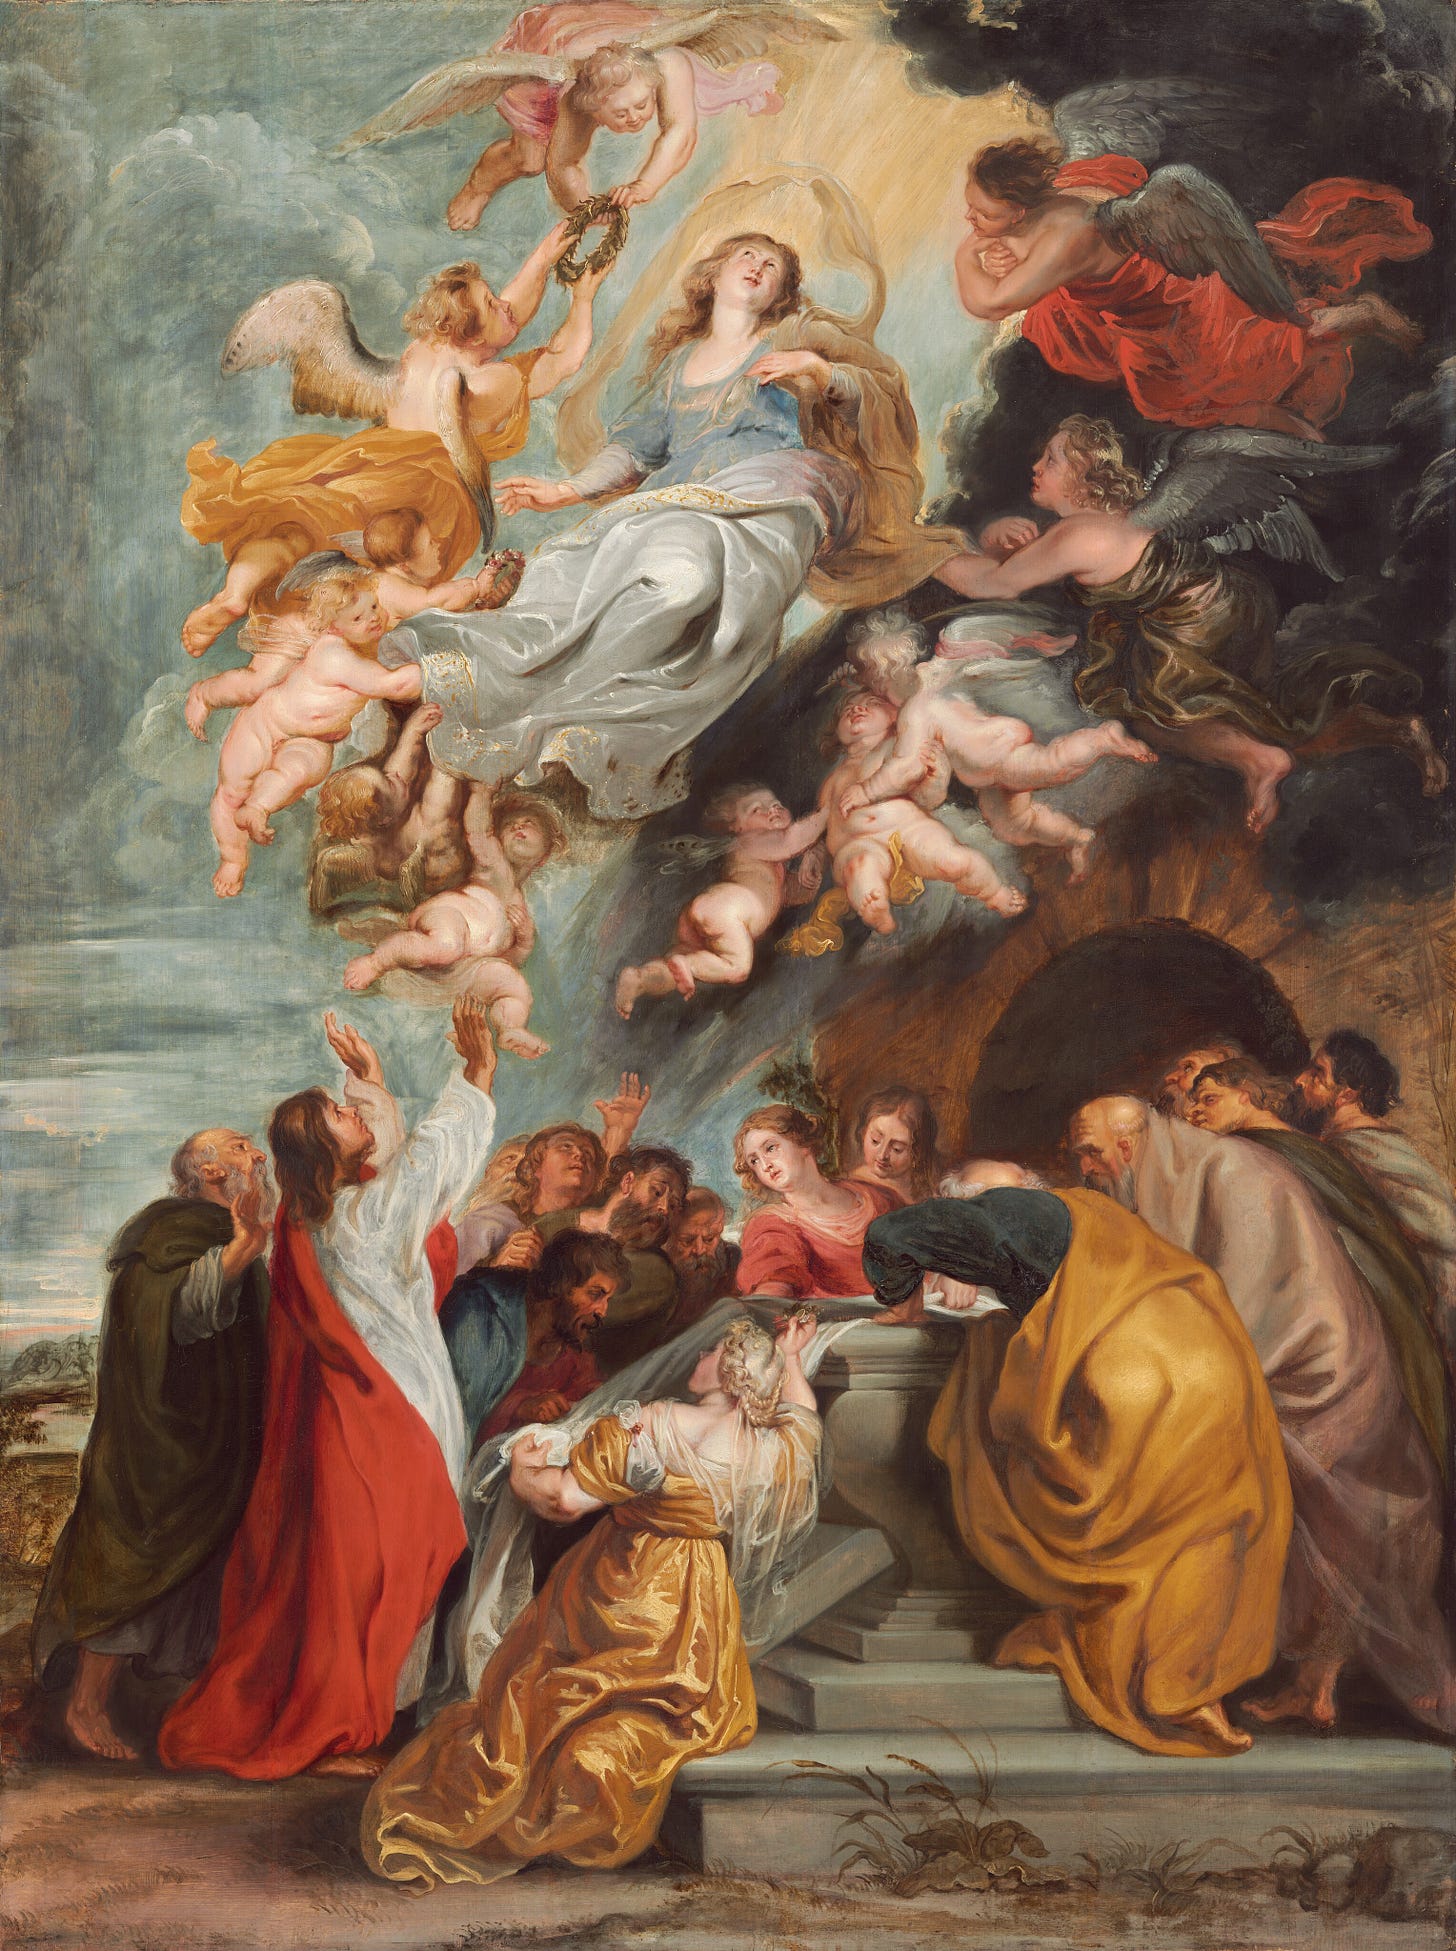 The Assumption of the Virgin, probably mid 1620s by Studio of Sir Peter Paul Rubens